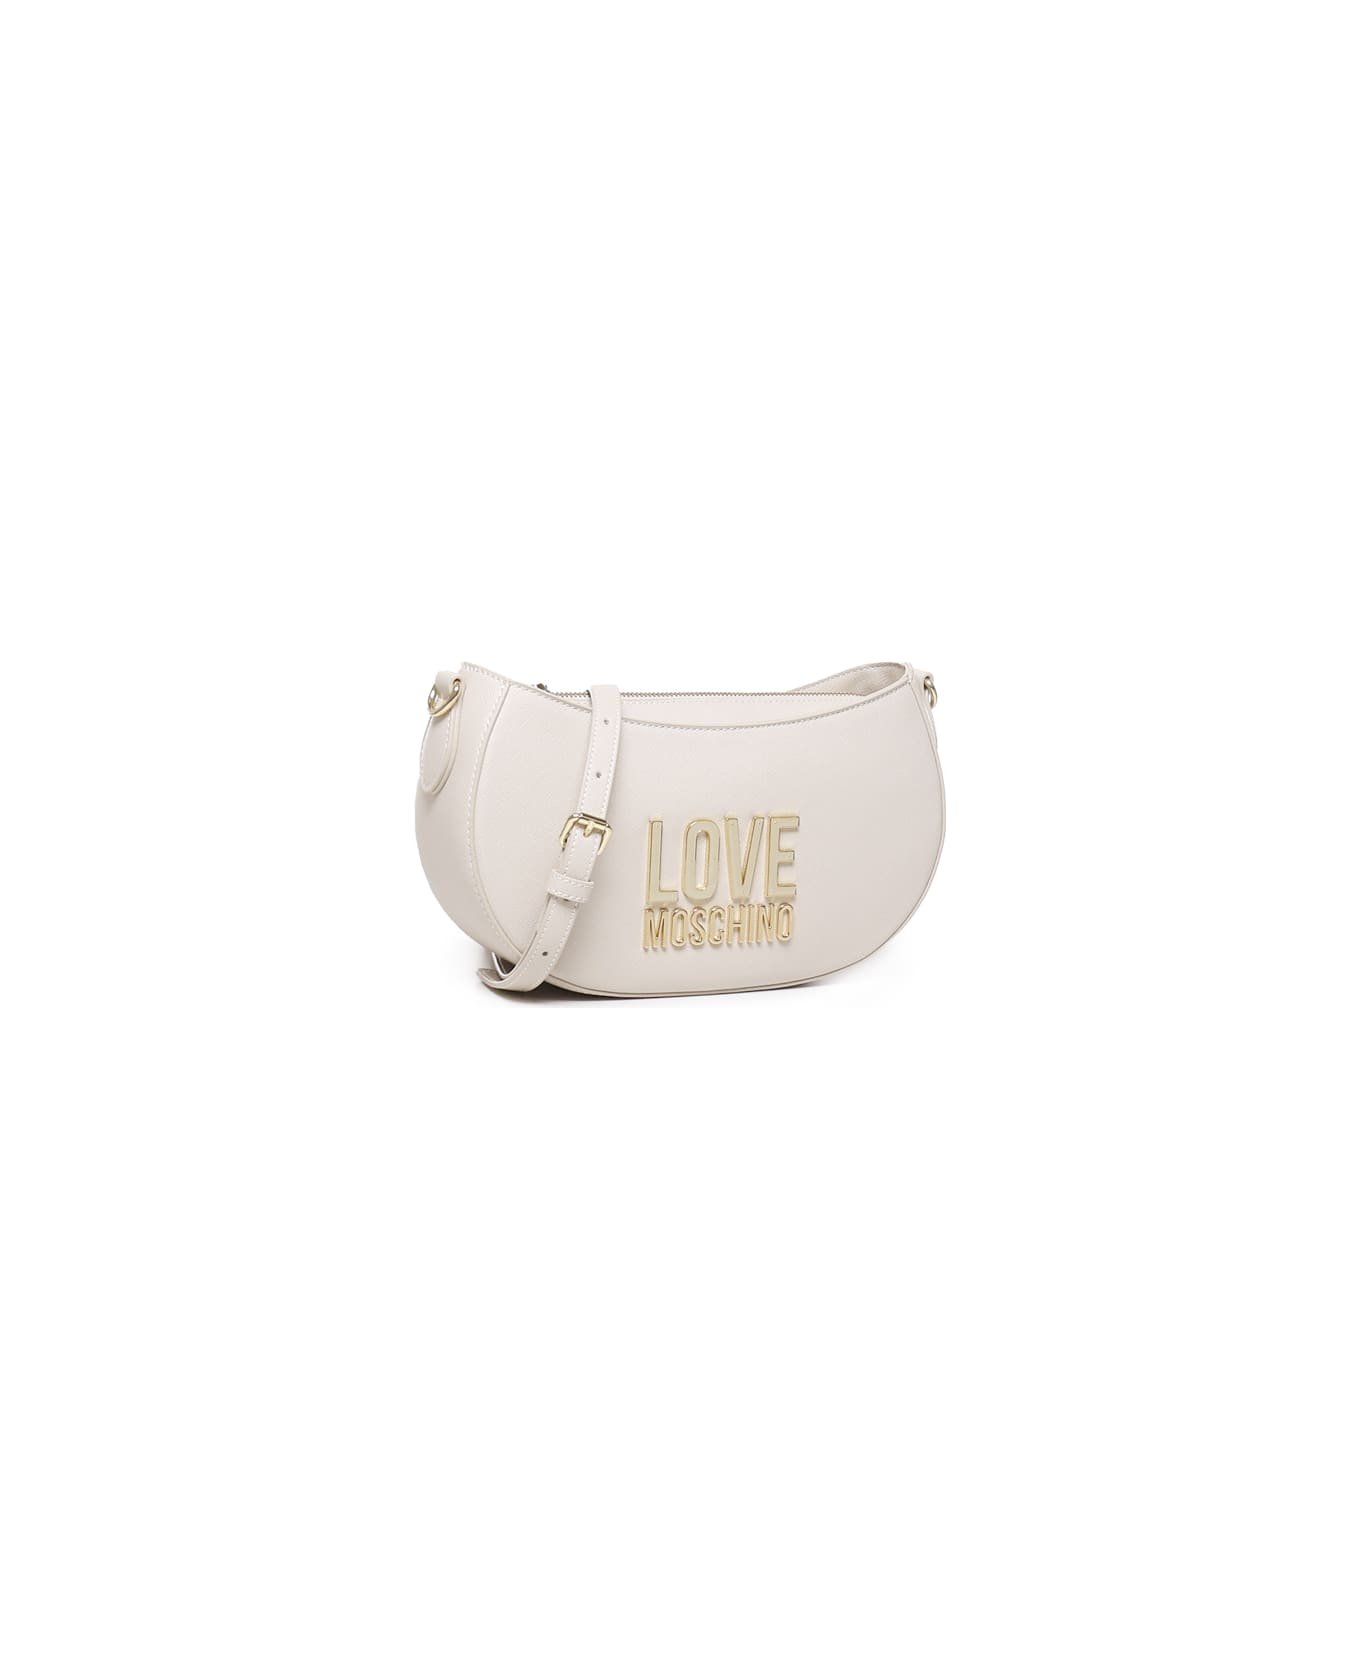 Love Moschino Jelly Shoulder Bag - Ivory